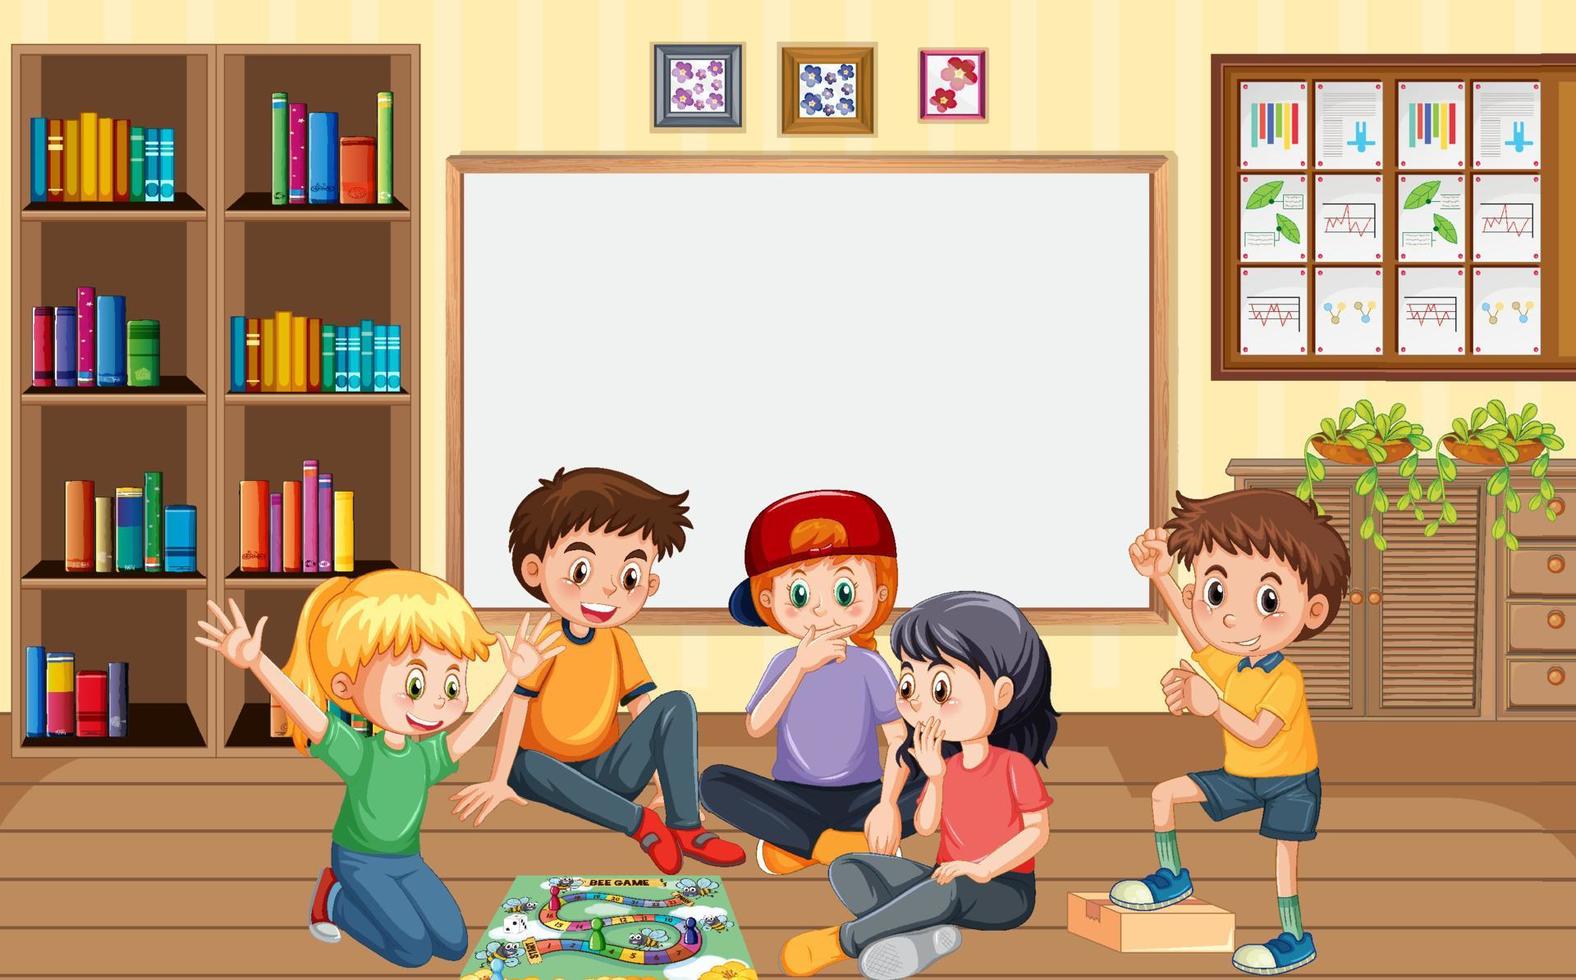 Children playing boardgame in the room vector